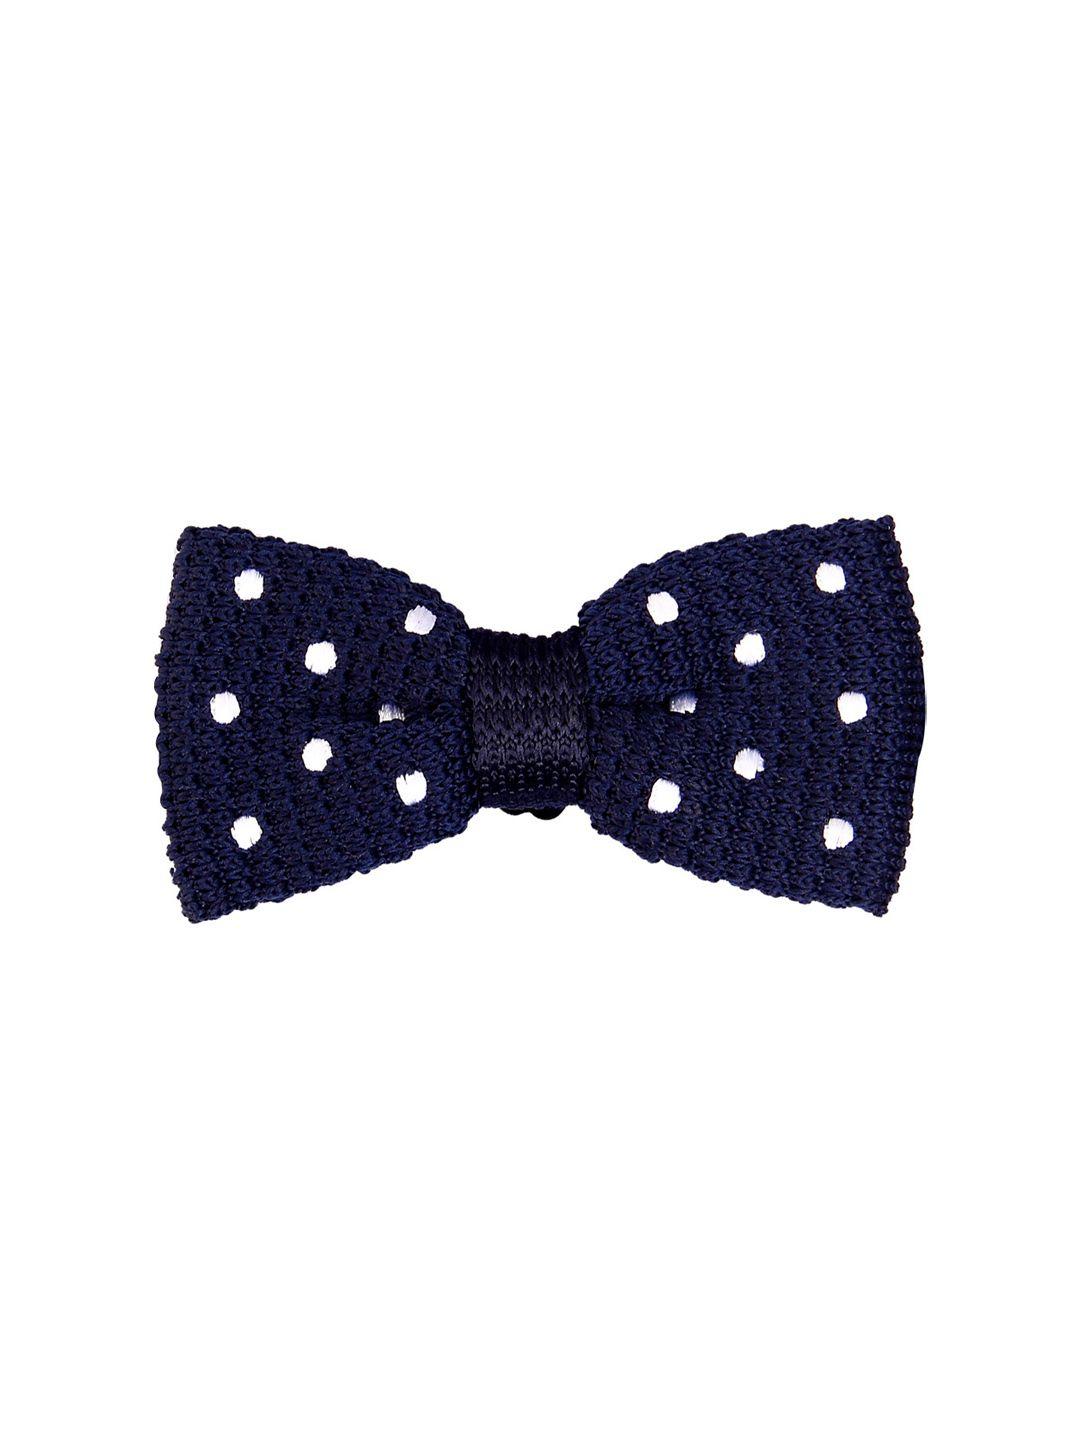 tossido navy blue & white knitted design bow tie